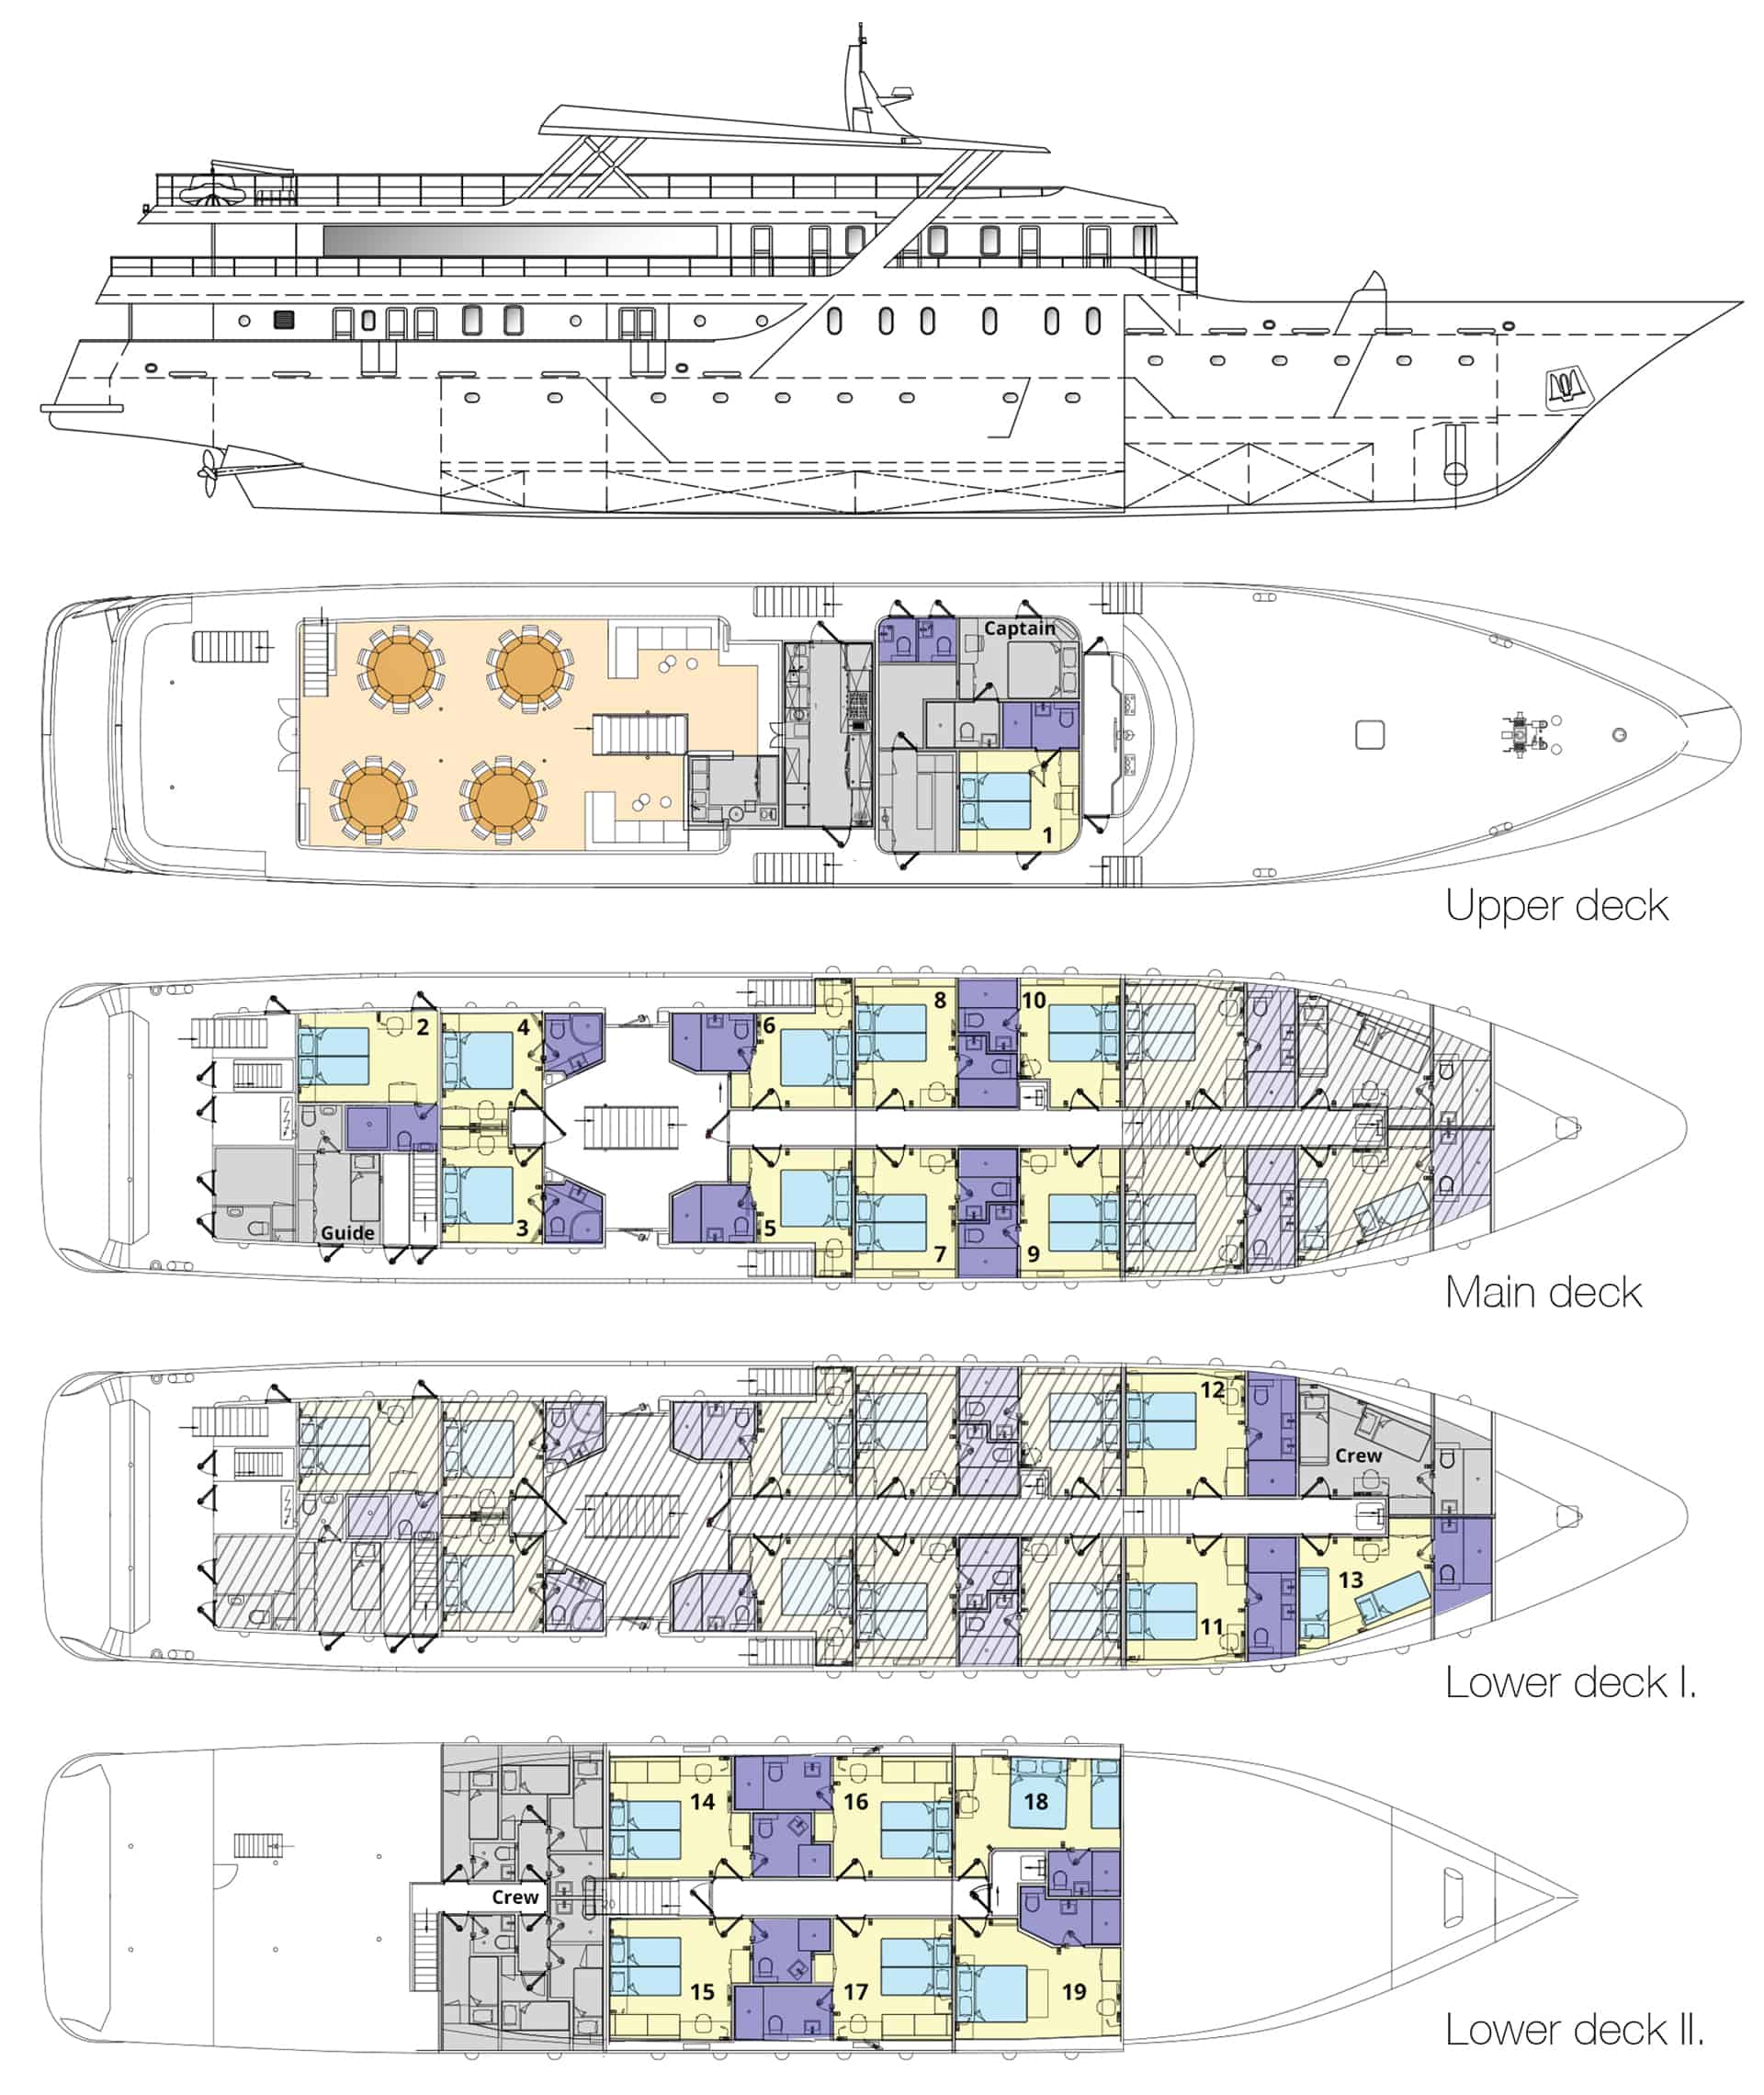 Deck plan of Nautilus deluxe Mediterranean yacht, showing four decks with guest cabins.